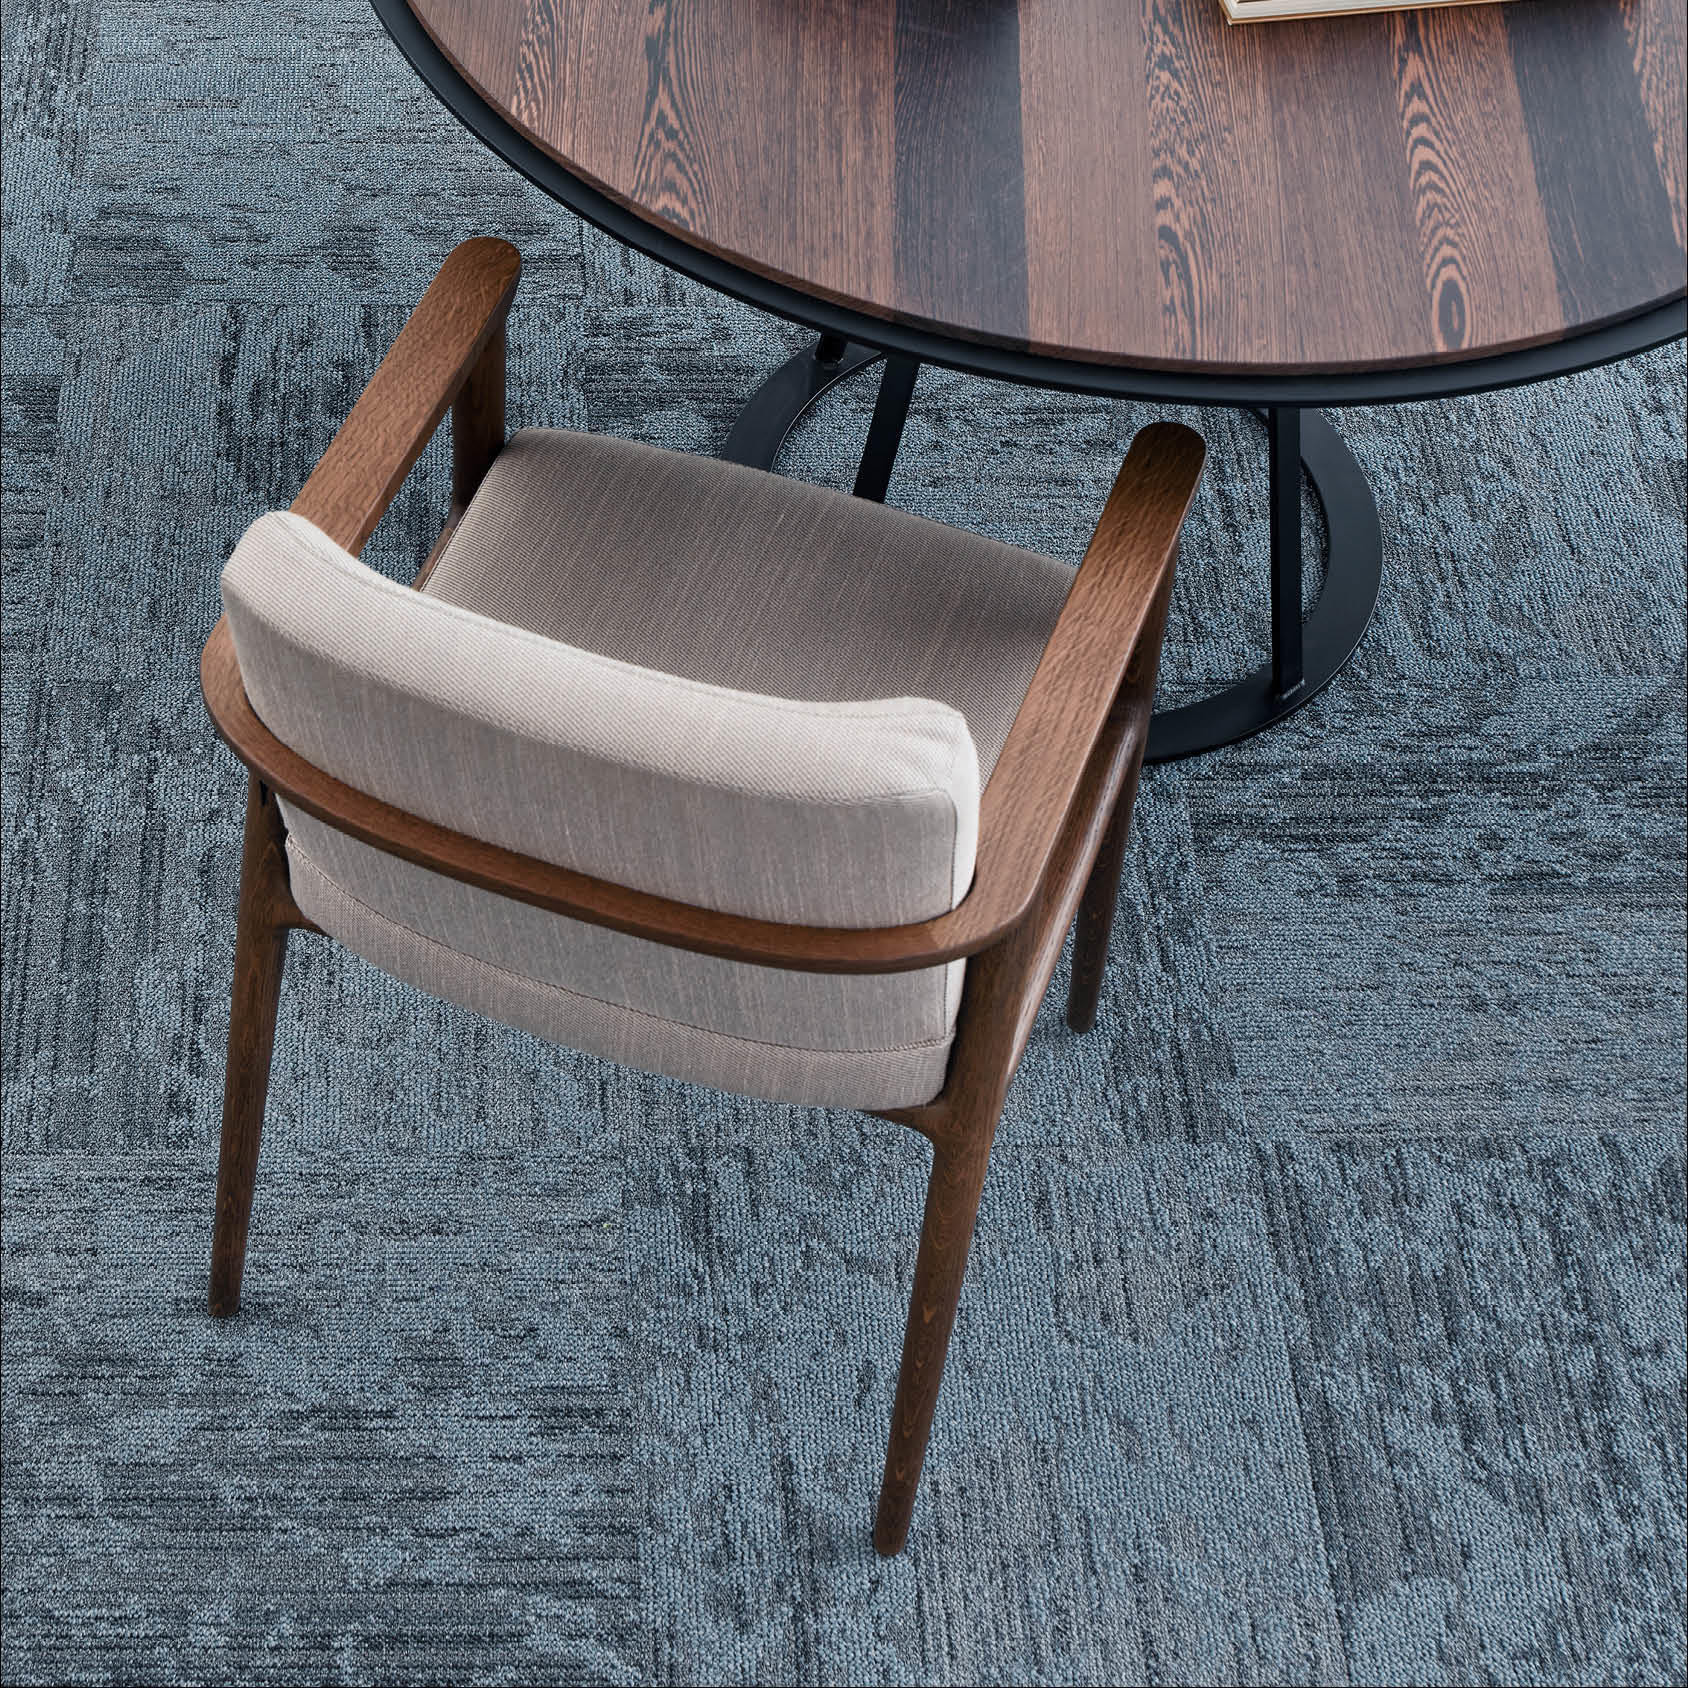 Desso Breccia Carpet Tile used for office space with table and chair